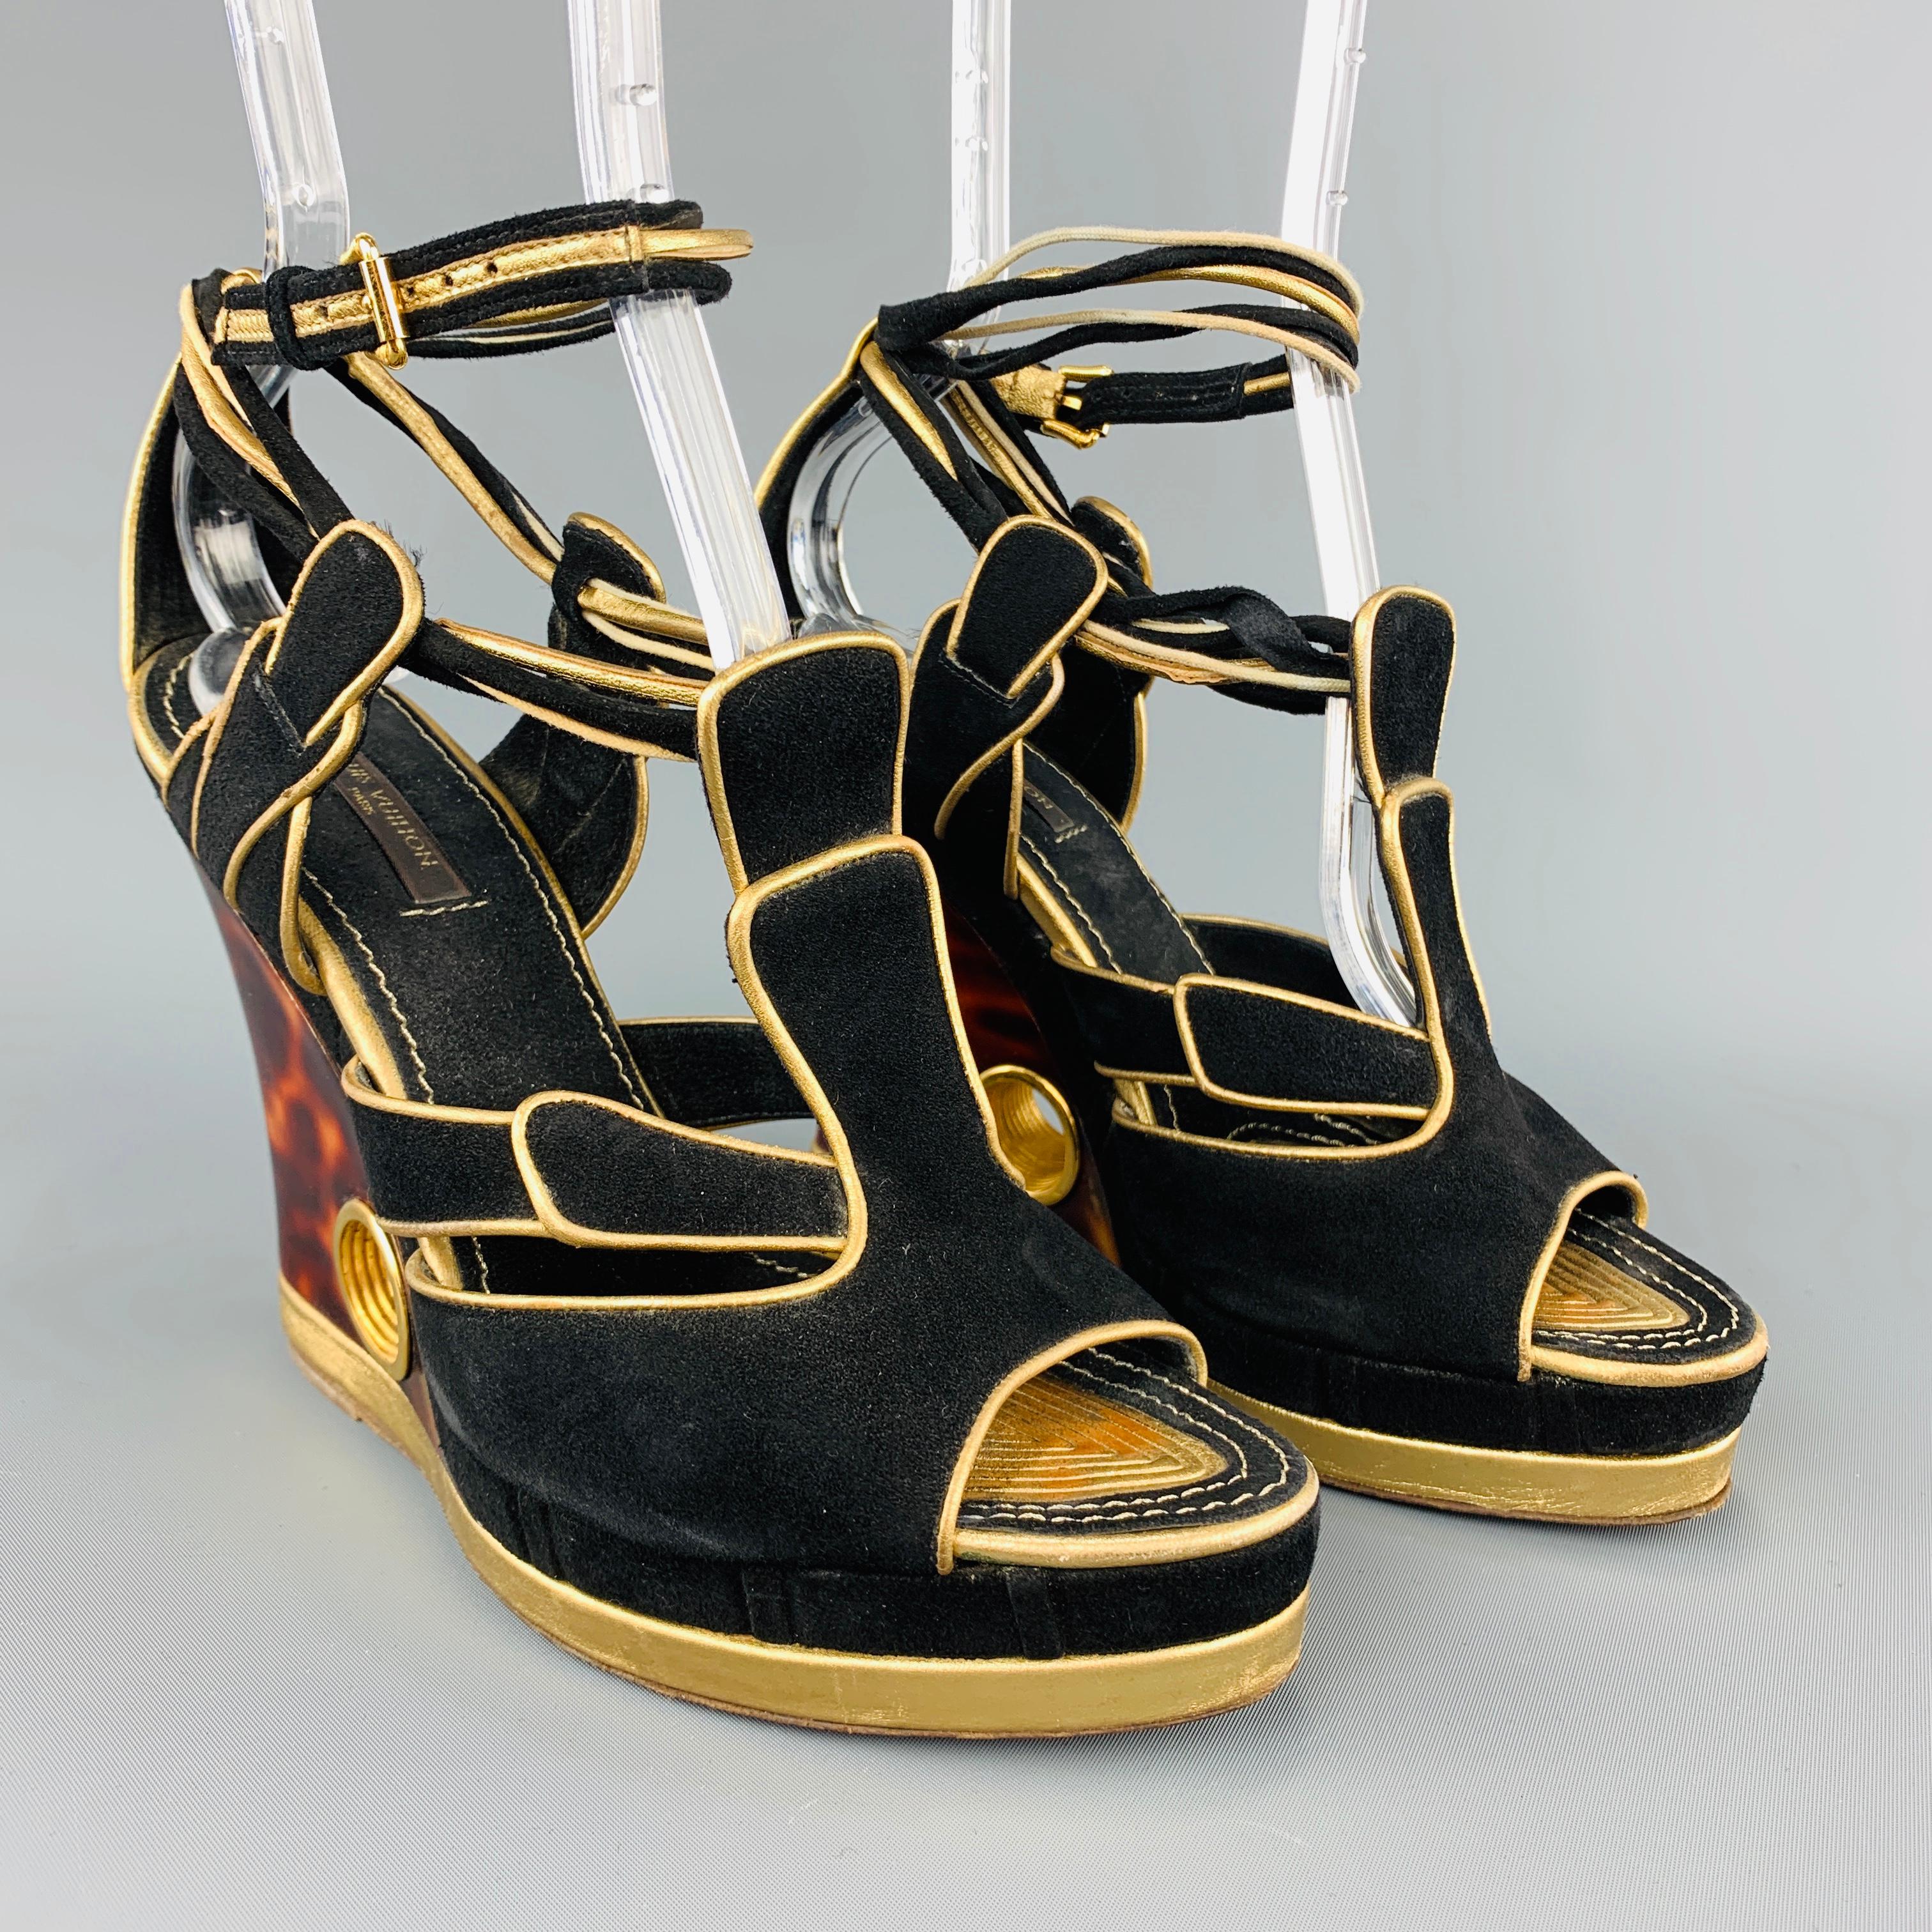 LOUIS VUITTON sandals come in black suede with metallic gold leather piping, peep toe and cutouts, and acrylic tort print wedge heel with gold tone metal cutout. Wear through out. Made in Italy.
 
Good Pre-Owned Condition.
Marked: IT 37
 
Heel: 4.5